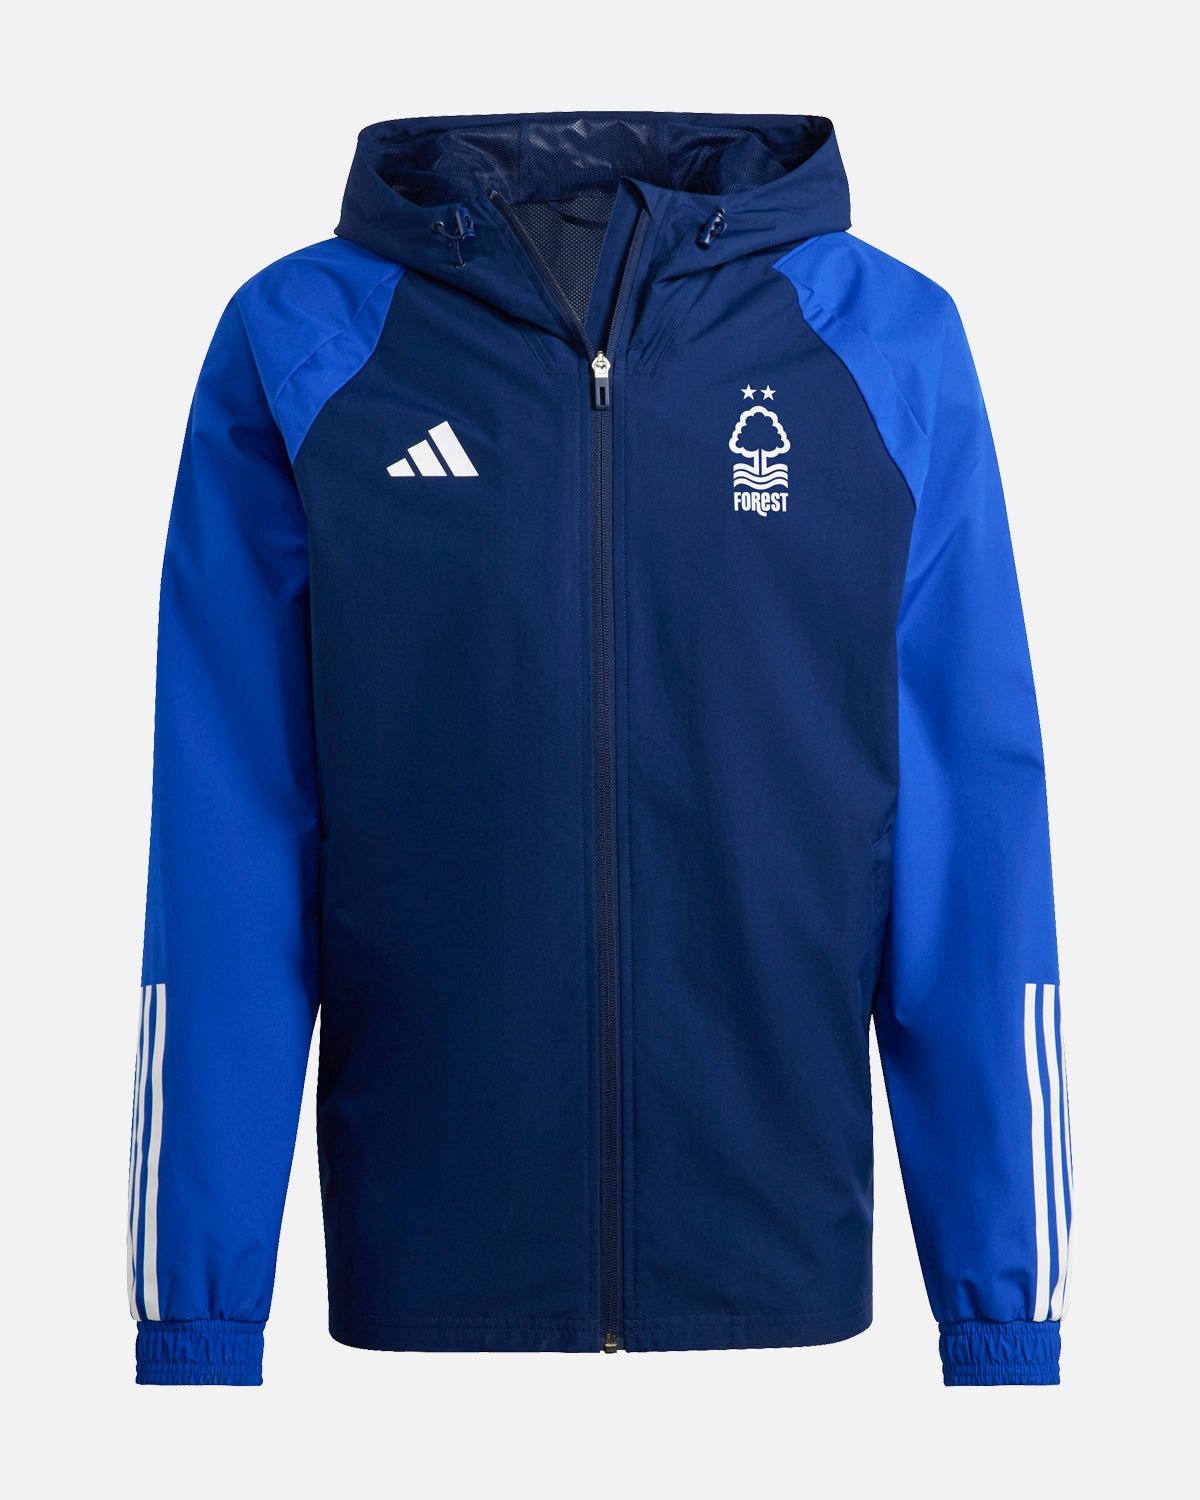 NFFC Navy All Weather Training Jacket 23-24 - Nottingham Forest FC